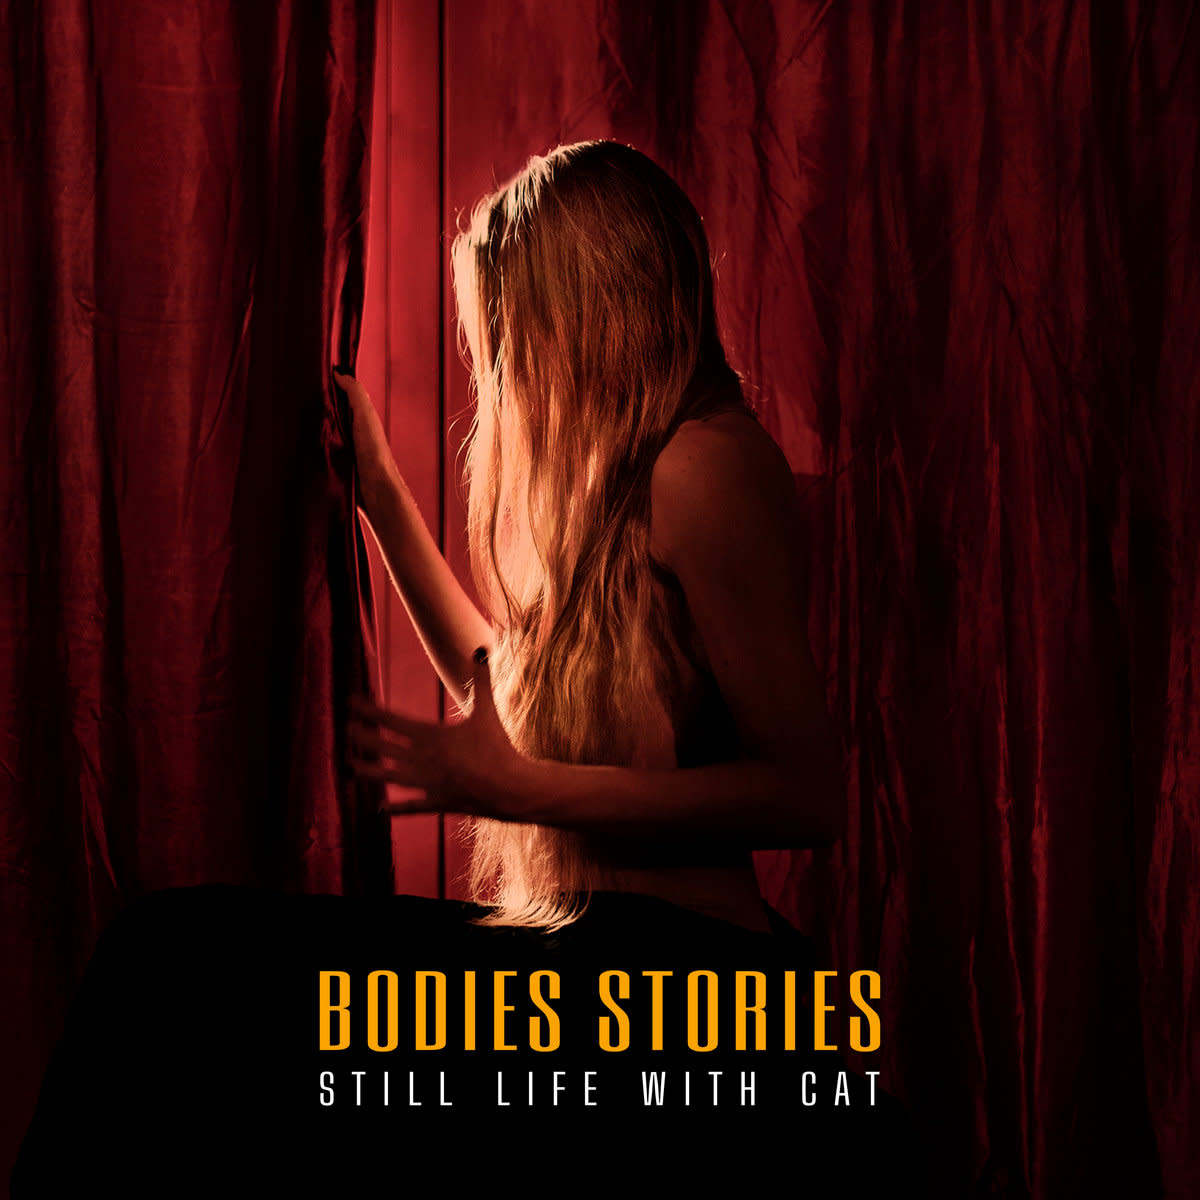 synthpop-album-review-bodies-stories-by-still-life-with-cat